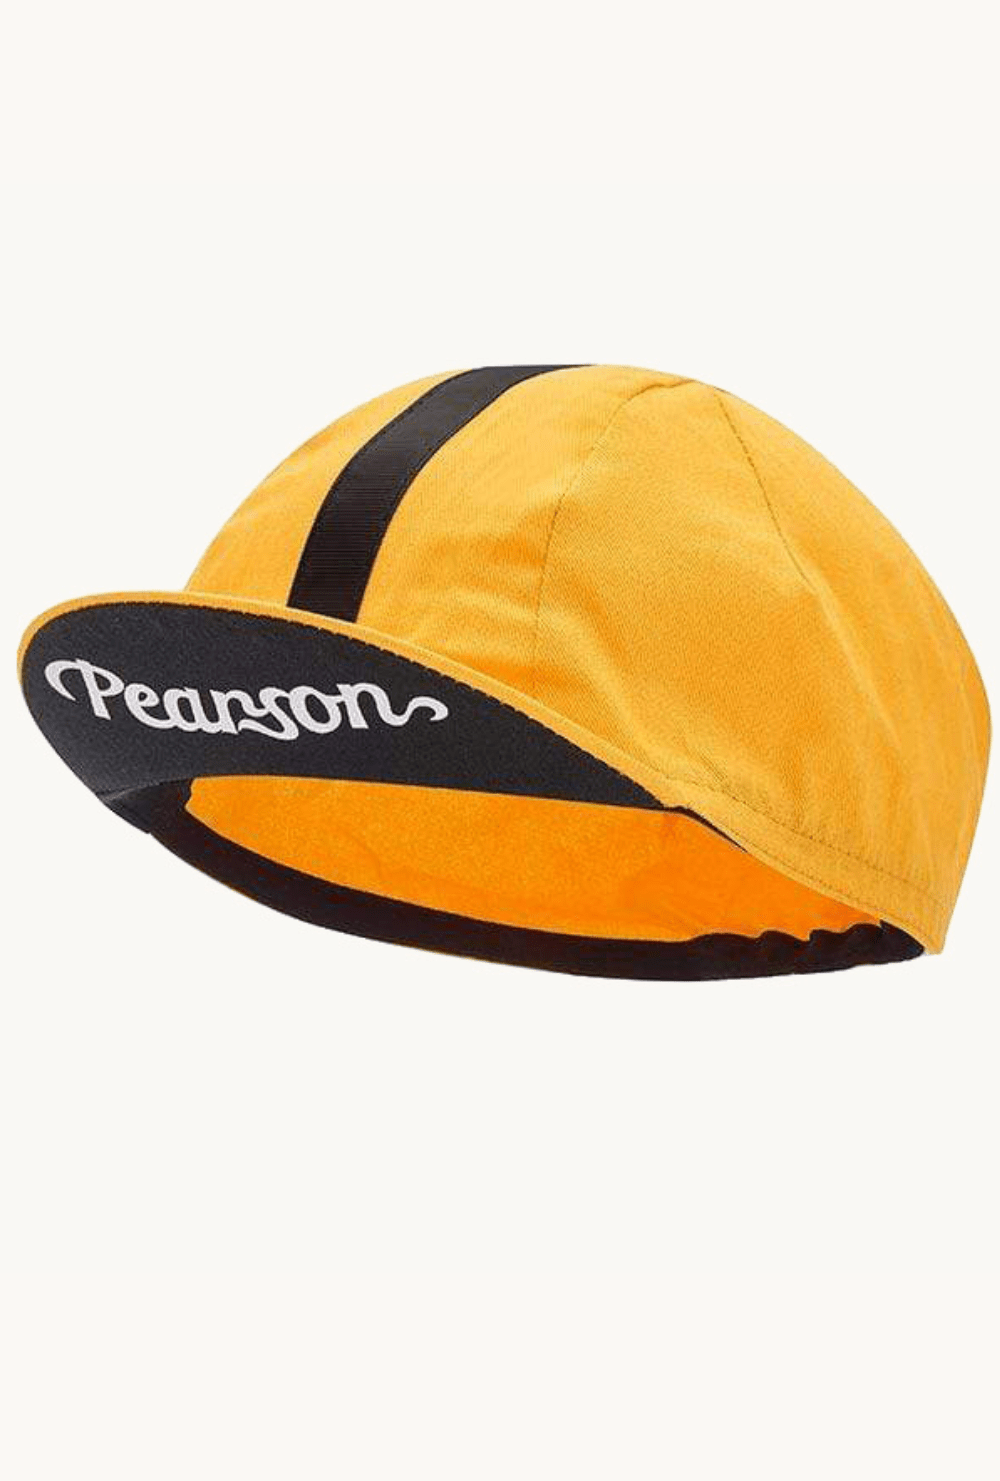 Pearson 1860  Come What May - Cycling Cap Ochre  Ochre